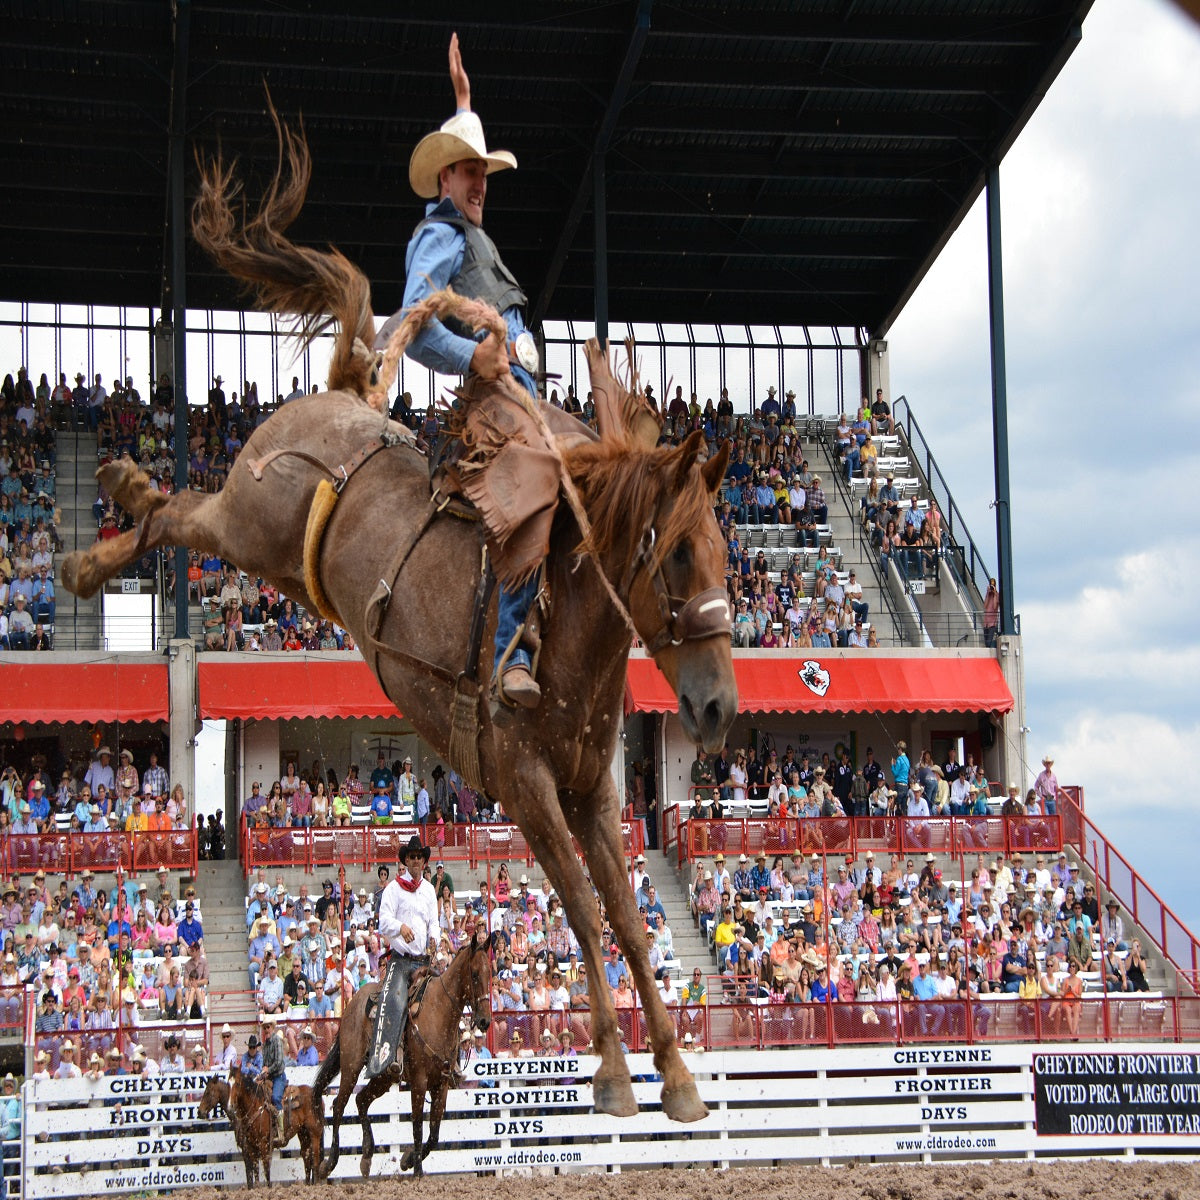 What Is The Atmosphere Like At Wyoming Rodeos?